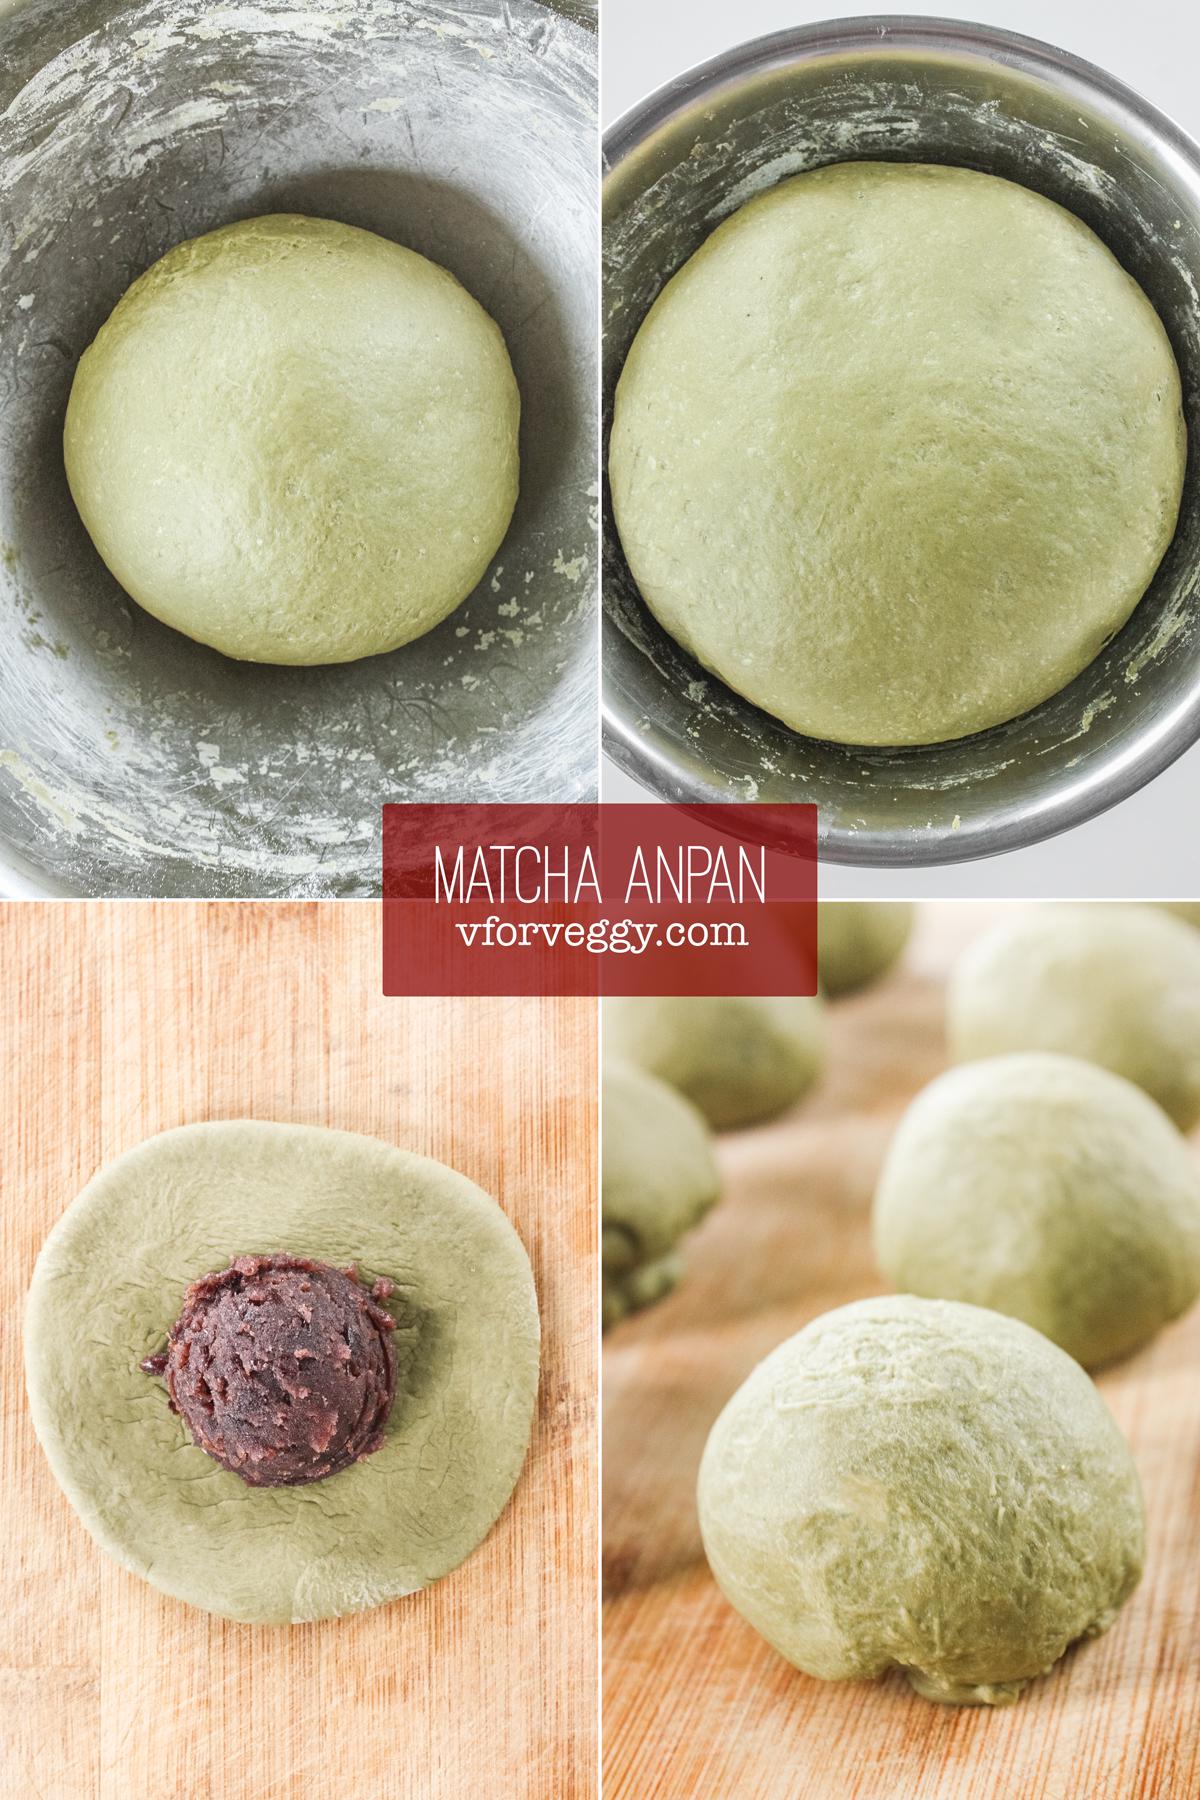 (1) Knead the dough. (2) Proof the dough until the volume doubles. (3) Flatten each portion of the dough and fill with red bean paste. (4) Wrap the filling and roll into a smooth ball.